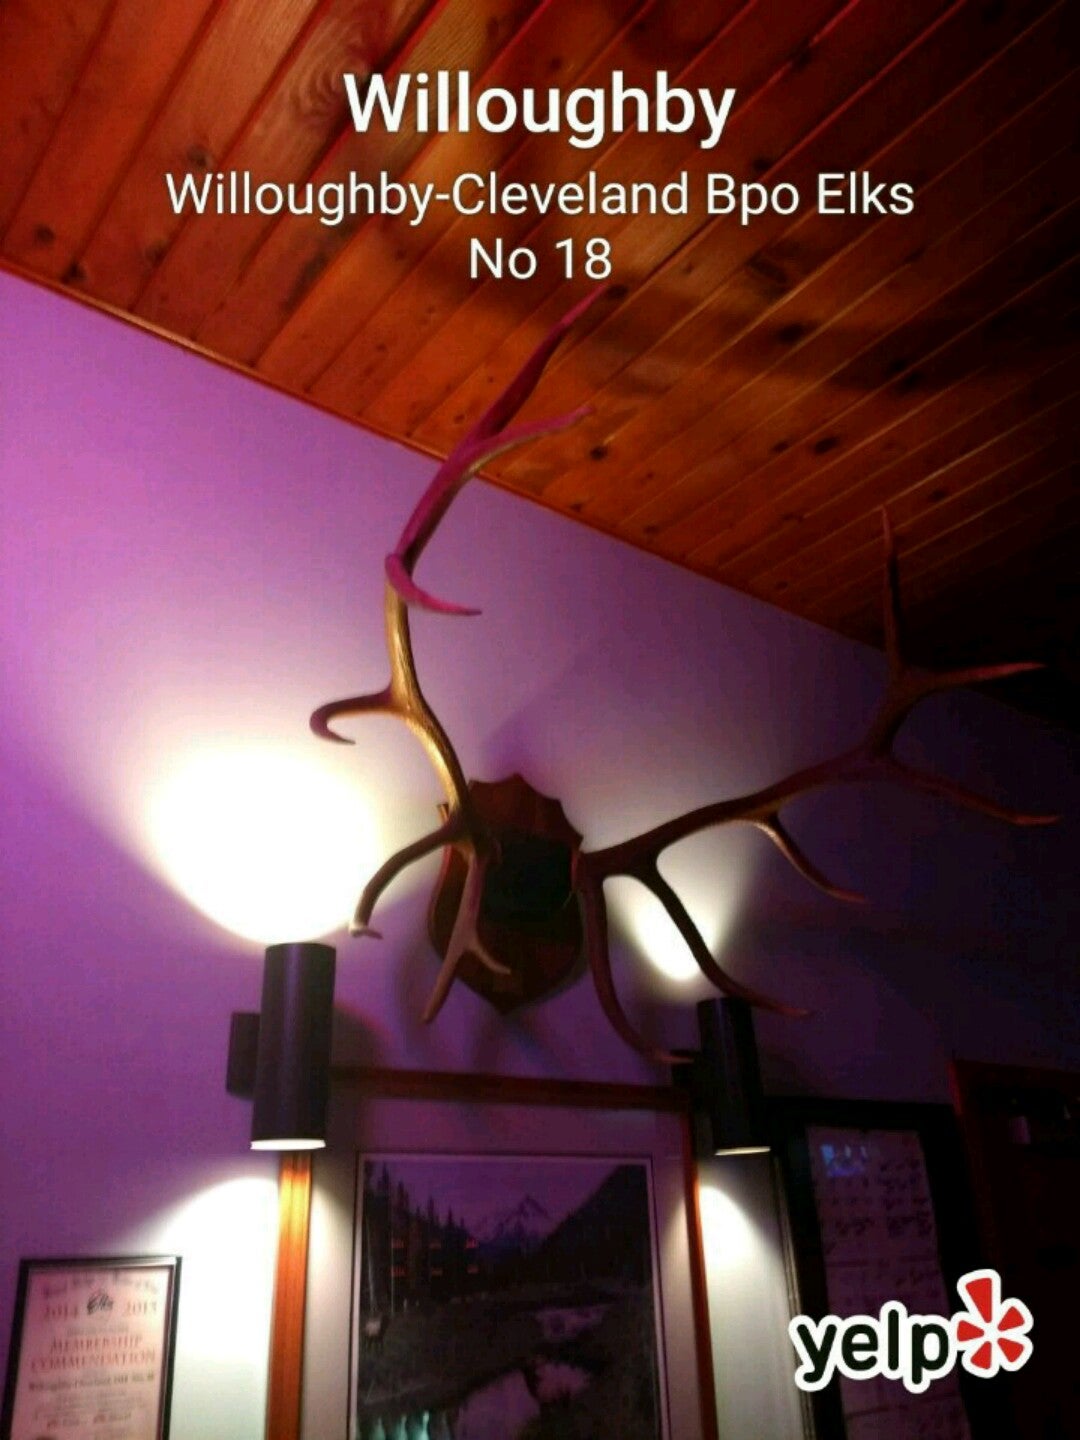 Willoughby-Cleveland Bpo Elks No 18, 38860 Mentor Ave, Willoughby